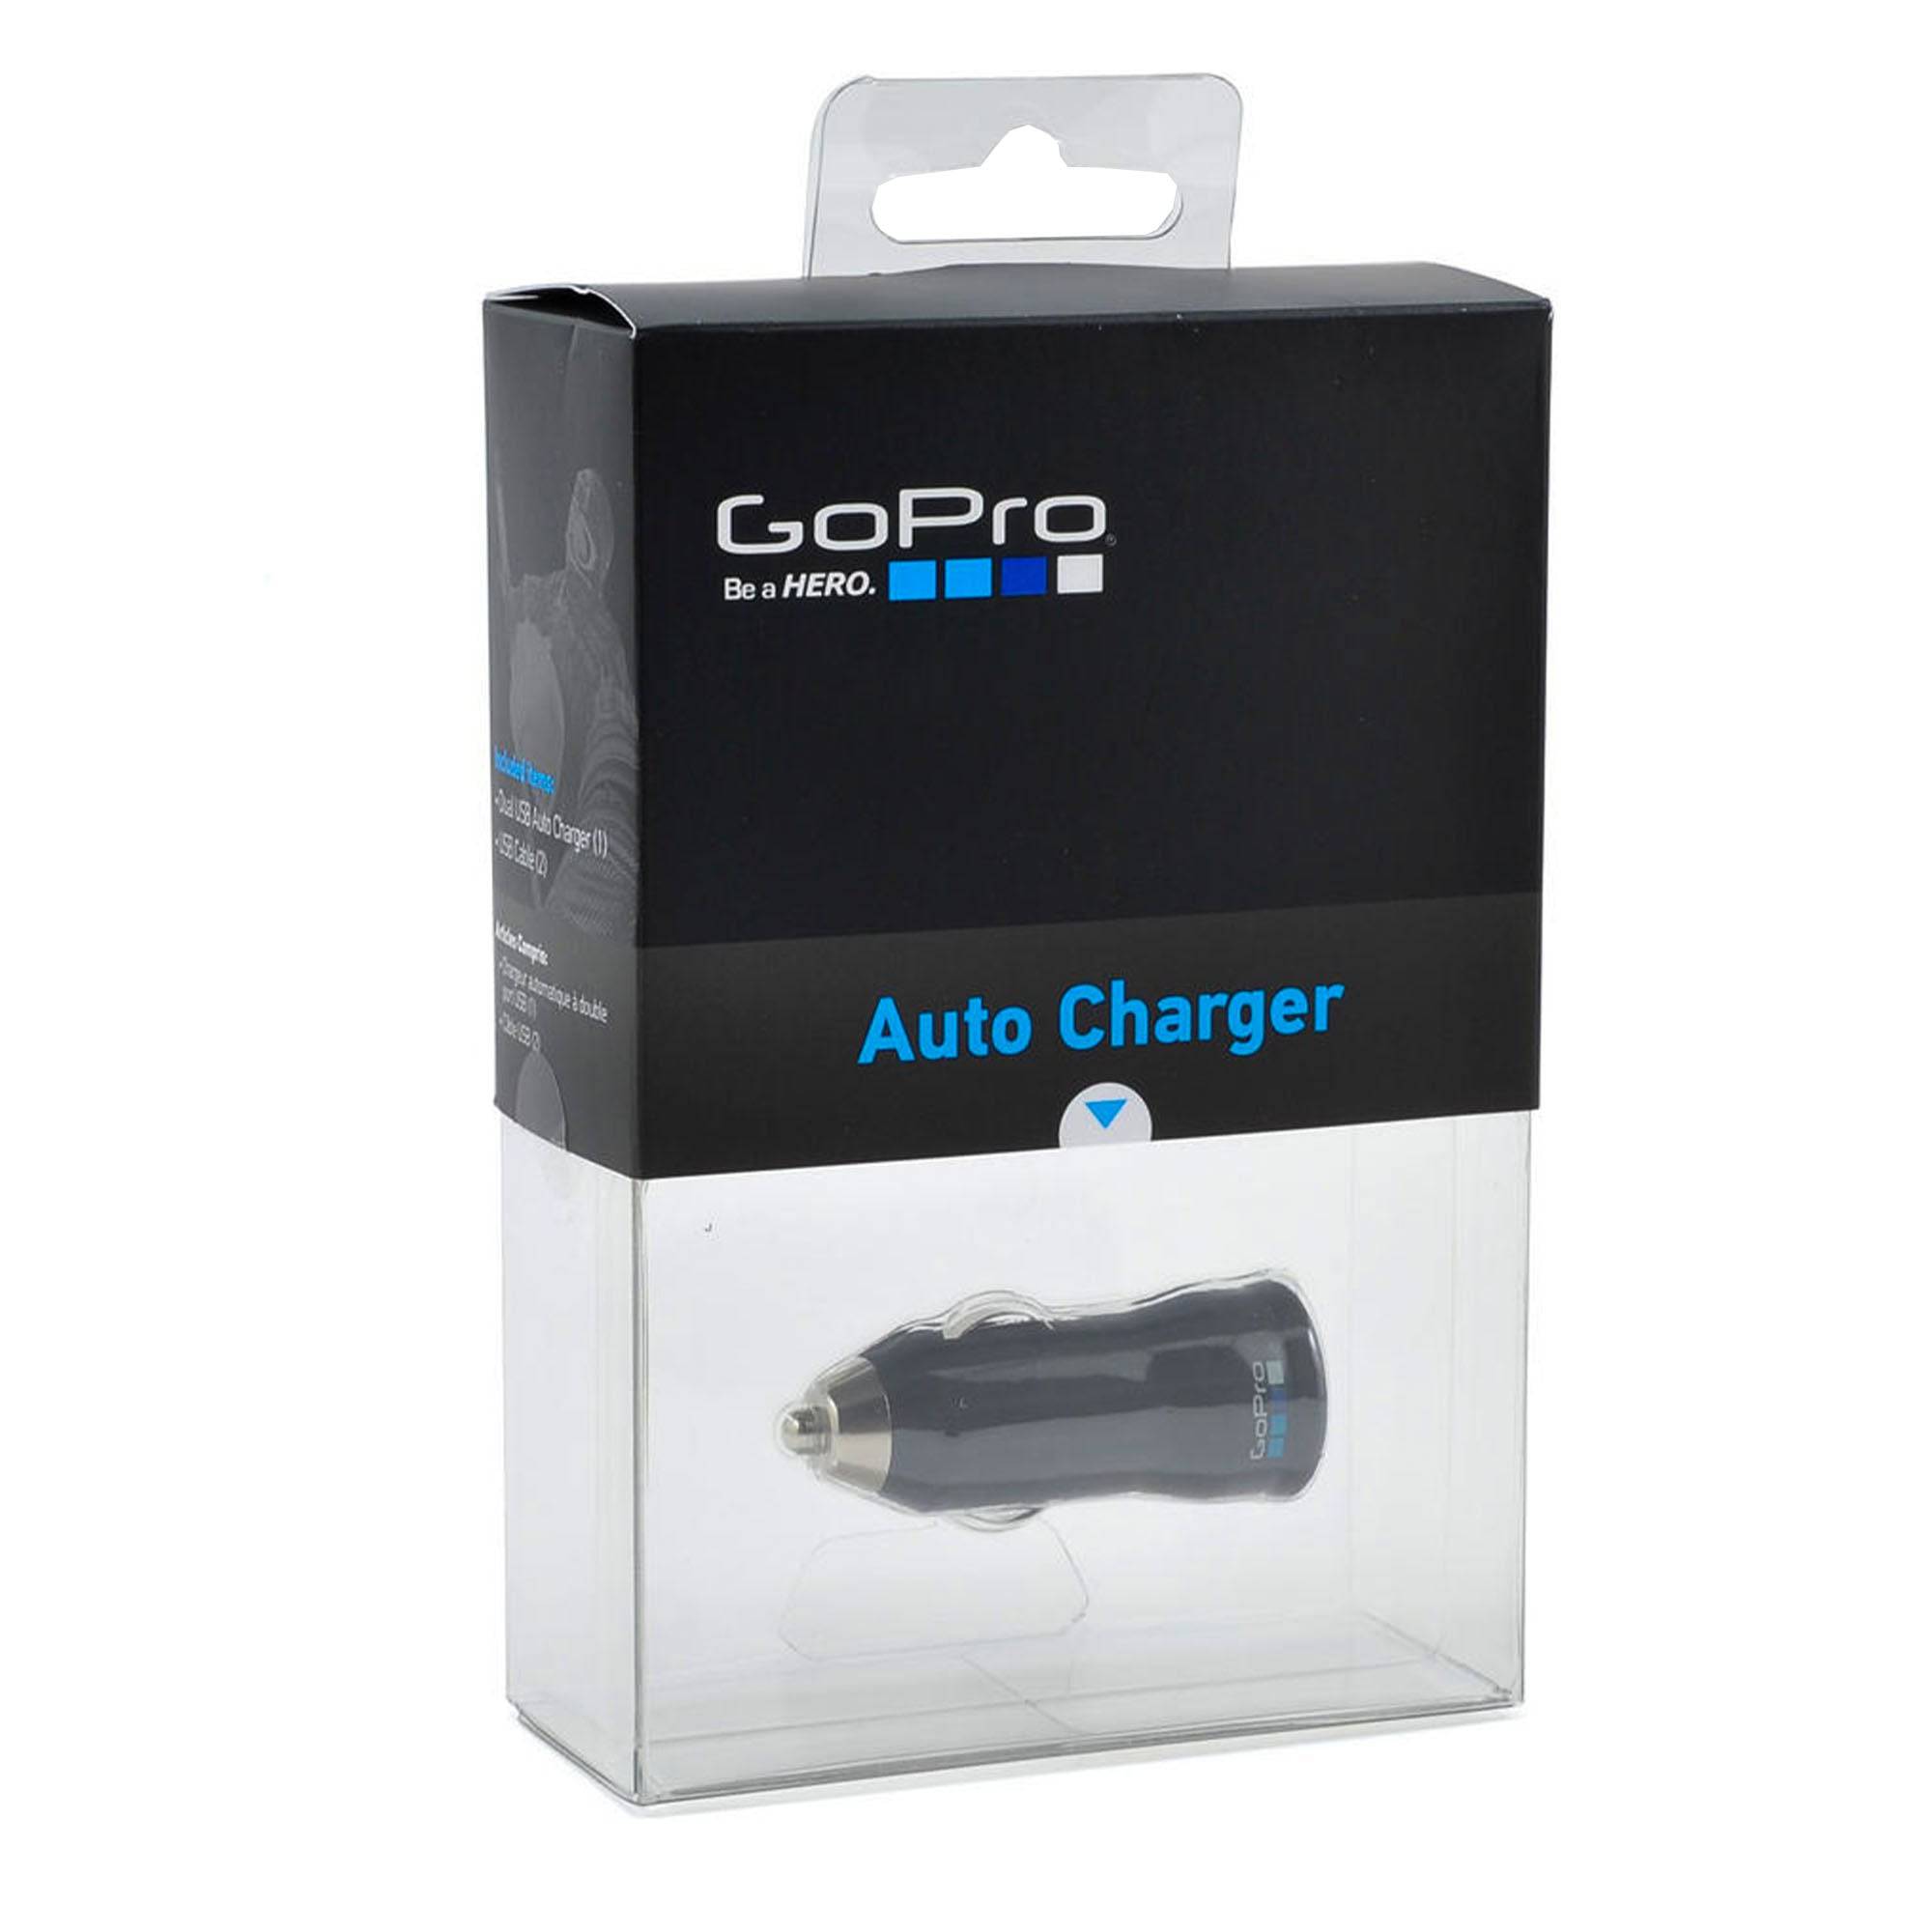 GoPro Auto Charger with Dual USB Ports